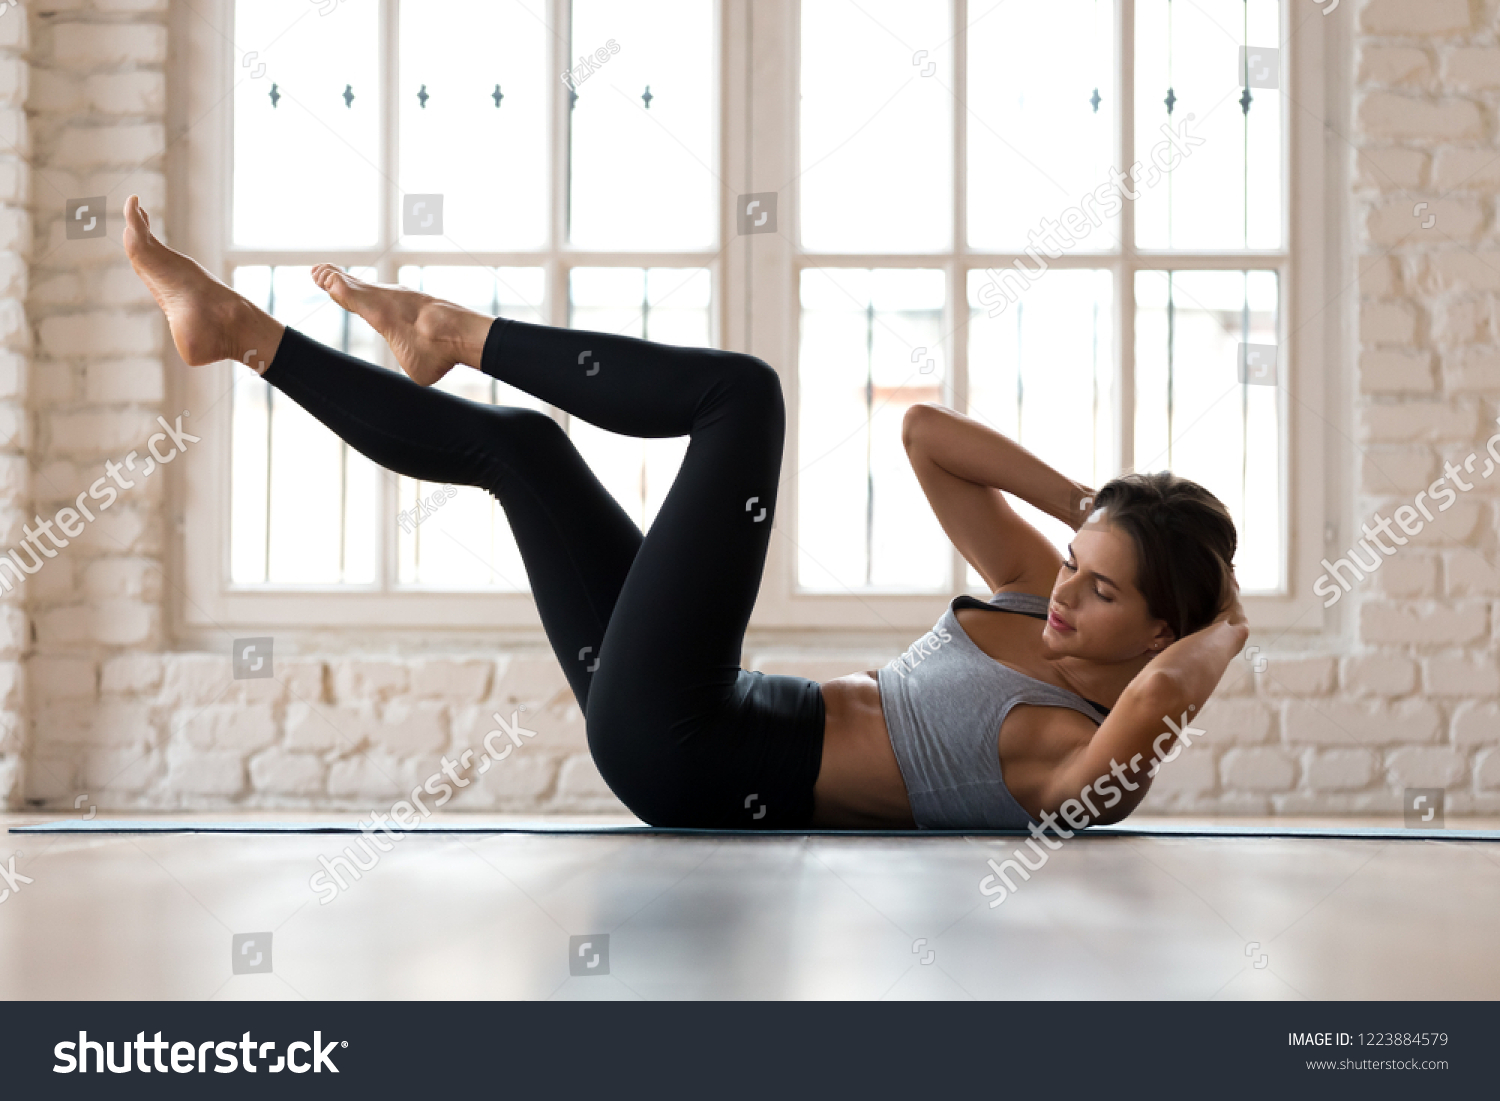 Young sporty woman practicing, doing crisscross exercise, bicycle crunches pose, working out, wearing sportswear, black pants and top, indoor full length, white sport studio #1223884579